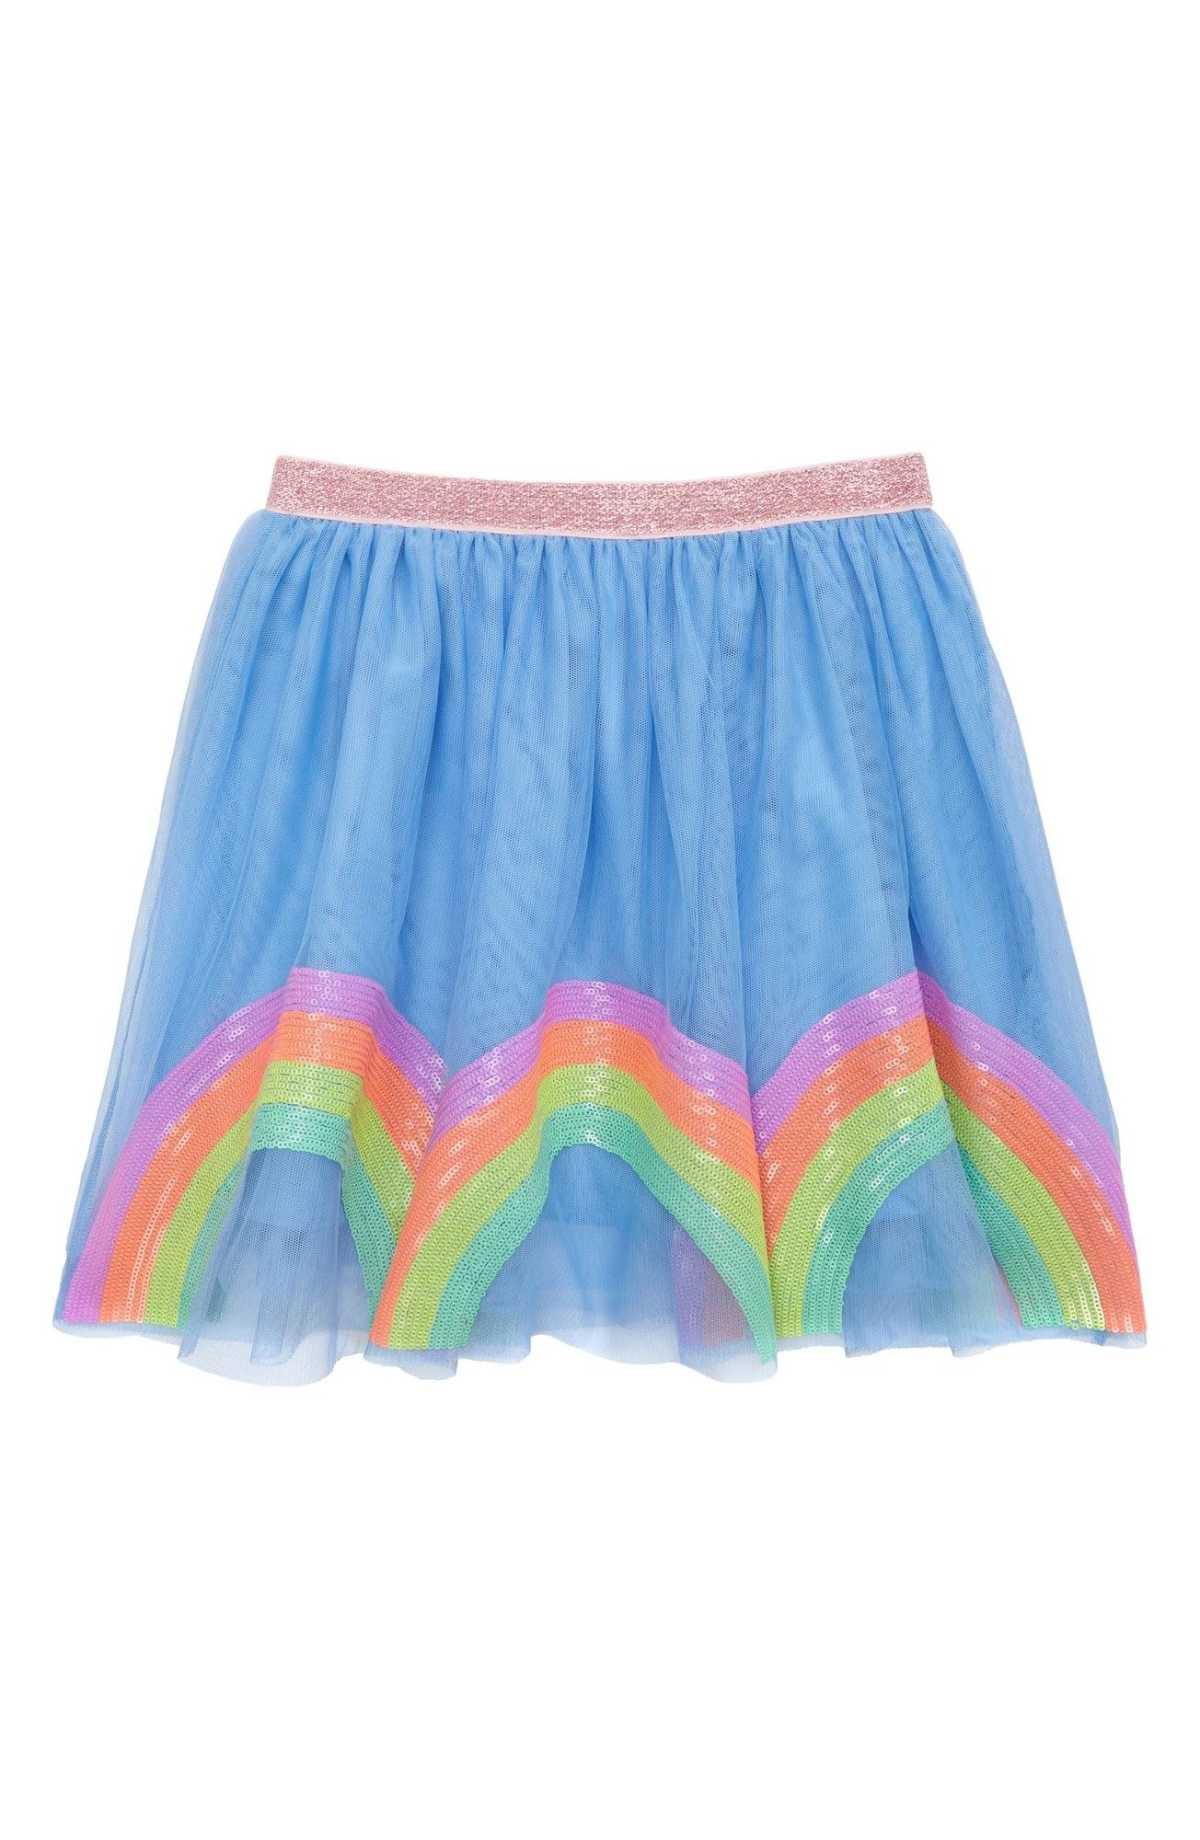 For Girls Who Love Rainbows Nordstrom Has Cute Swag on Sale | CafeMom.com